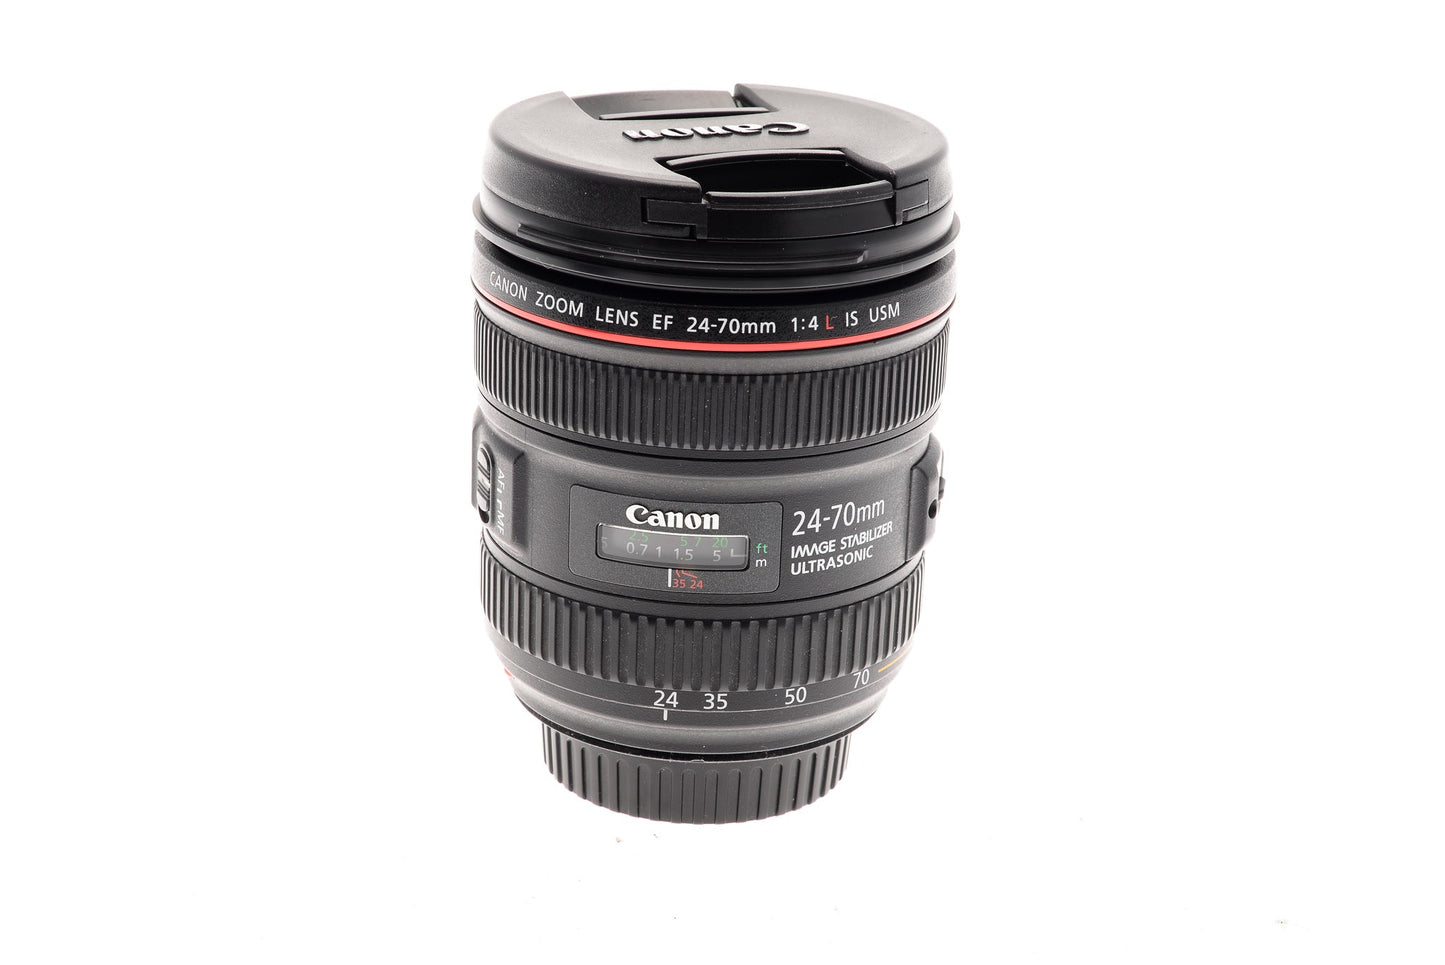 Canon 24-70mm f4 L IS USM - Lens